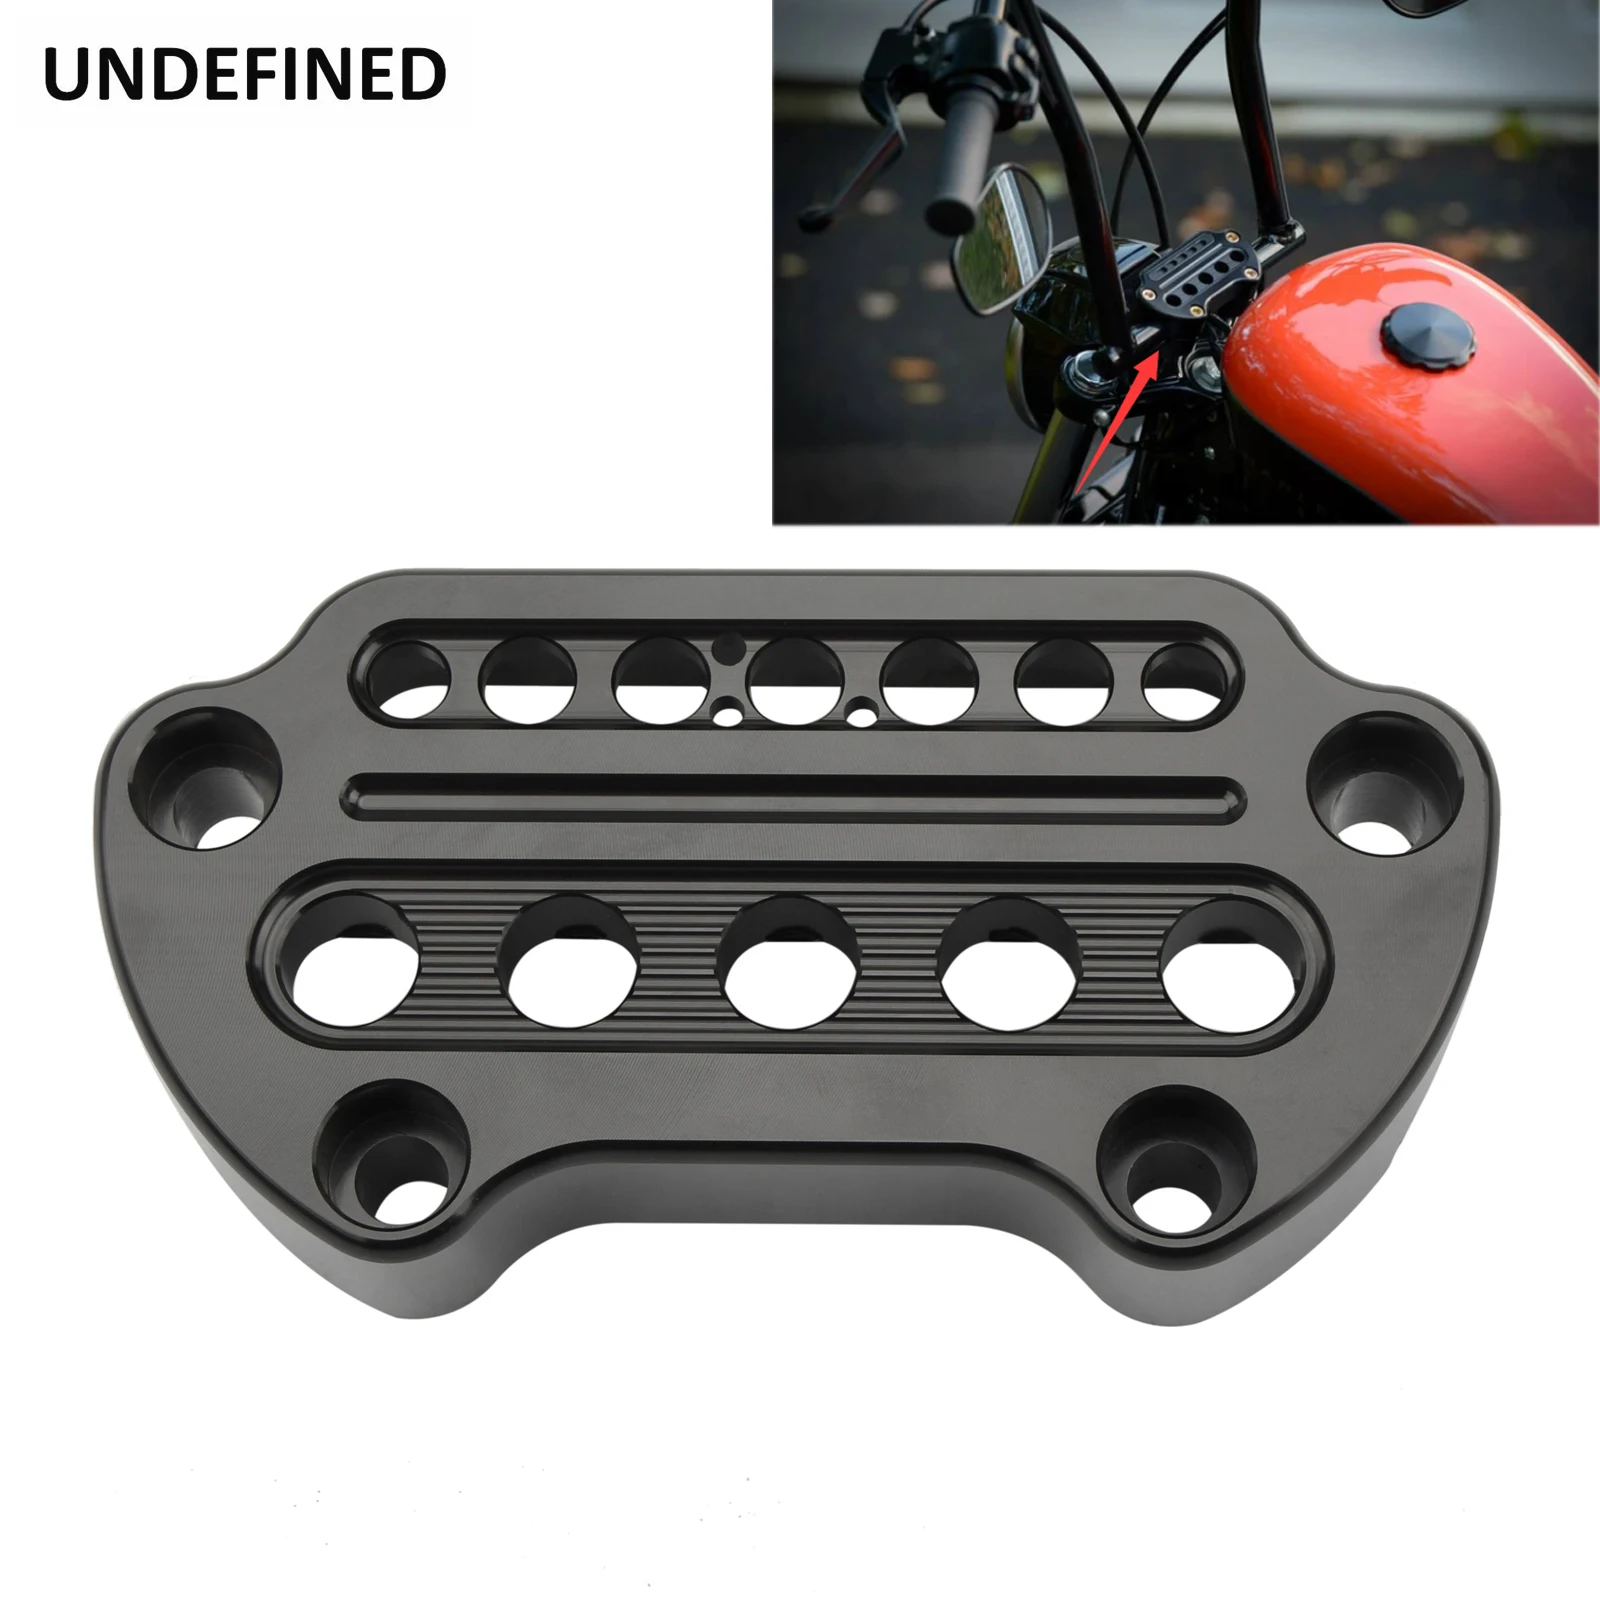 

Motorcycle Aluminum Indicator Light Handlebar Top Bar Riser Clamps Mount for Harley Sportster 1200 883 XL Dyna Low Rider FXDF